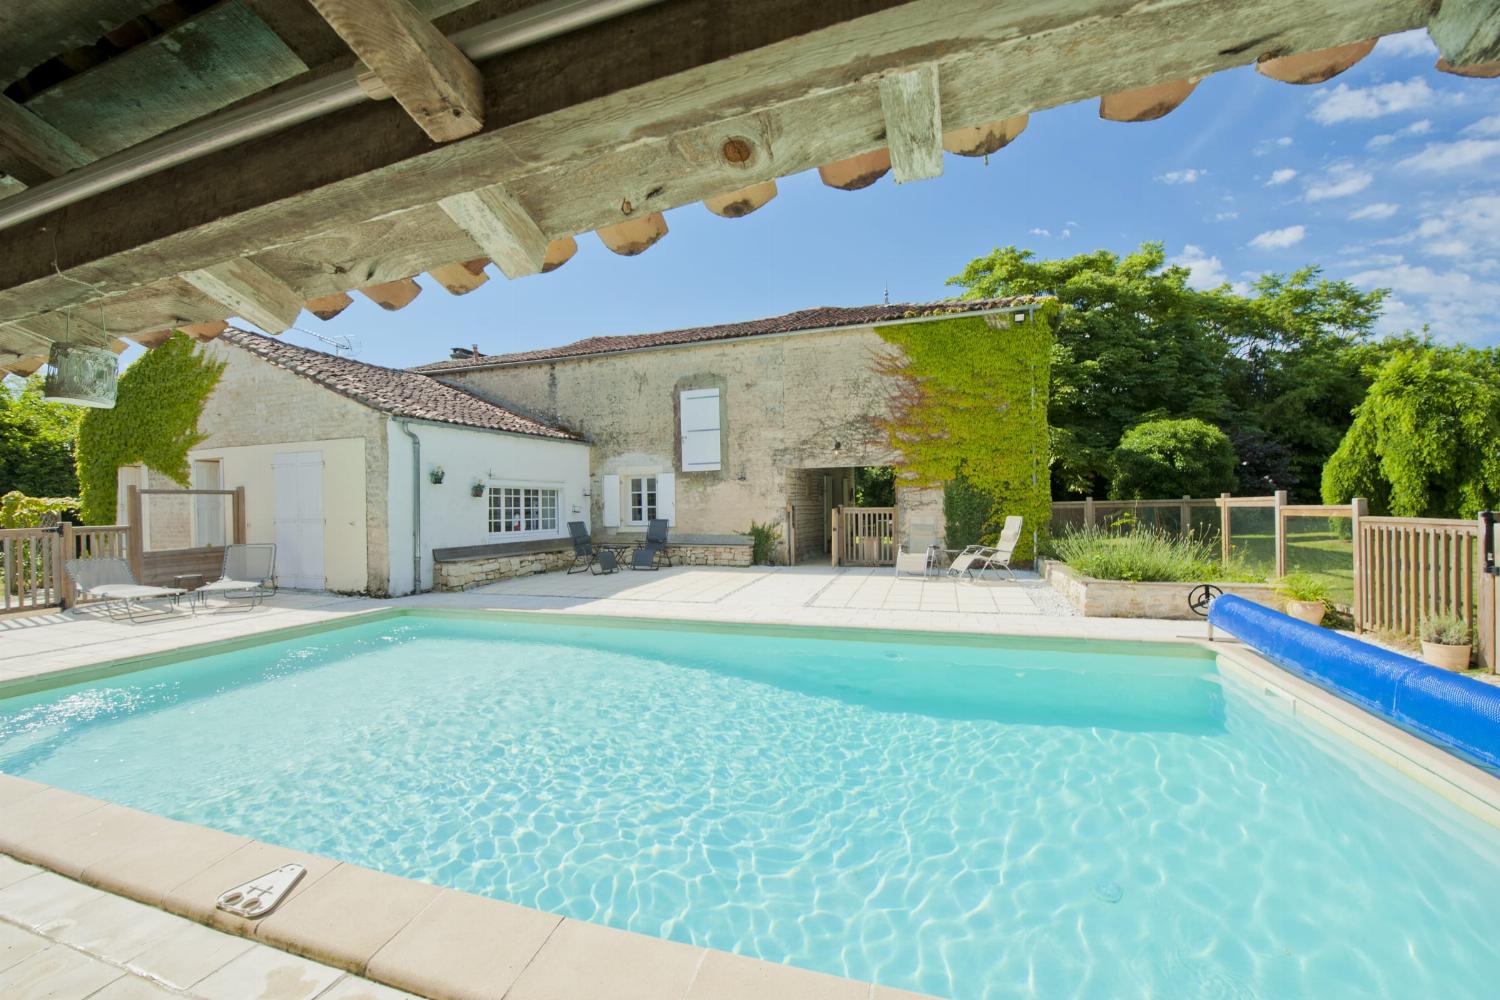 Rental accommodation in Charente with private heated pool